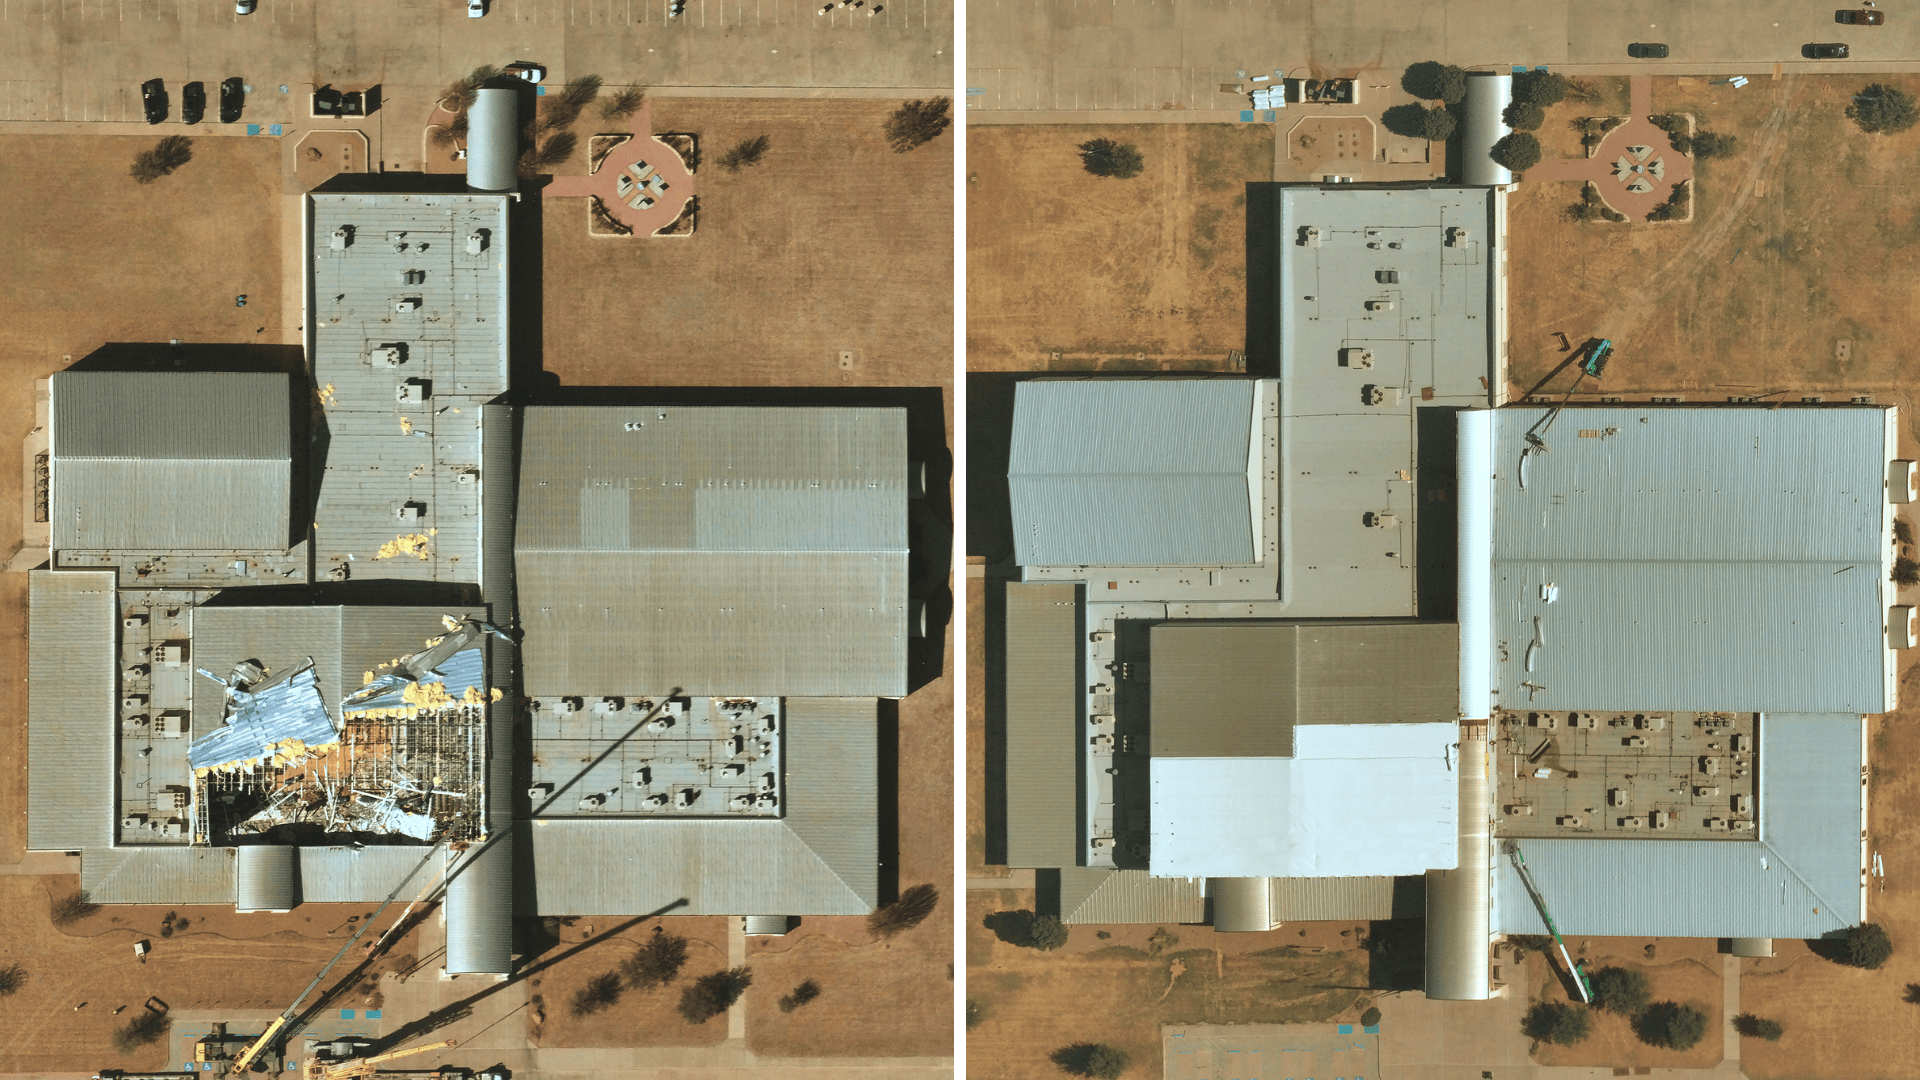 Near Space Labs' post-catastrophe imagery of a damaged commercial building (left) compared to 90 days later, confirming near-complete repairs (right).